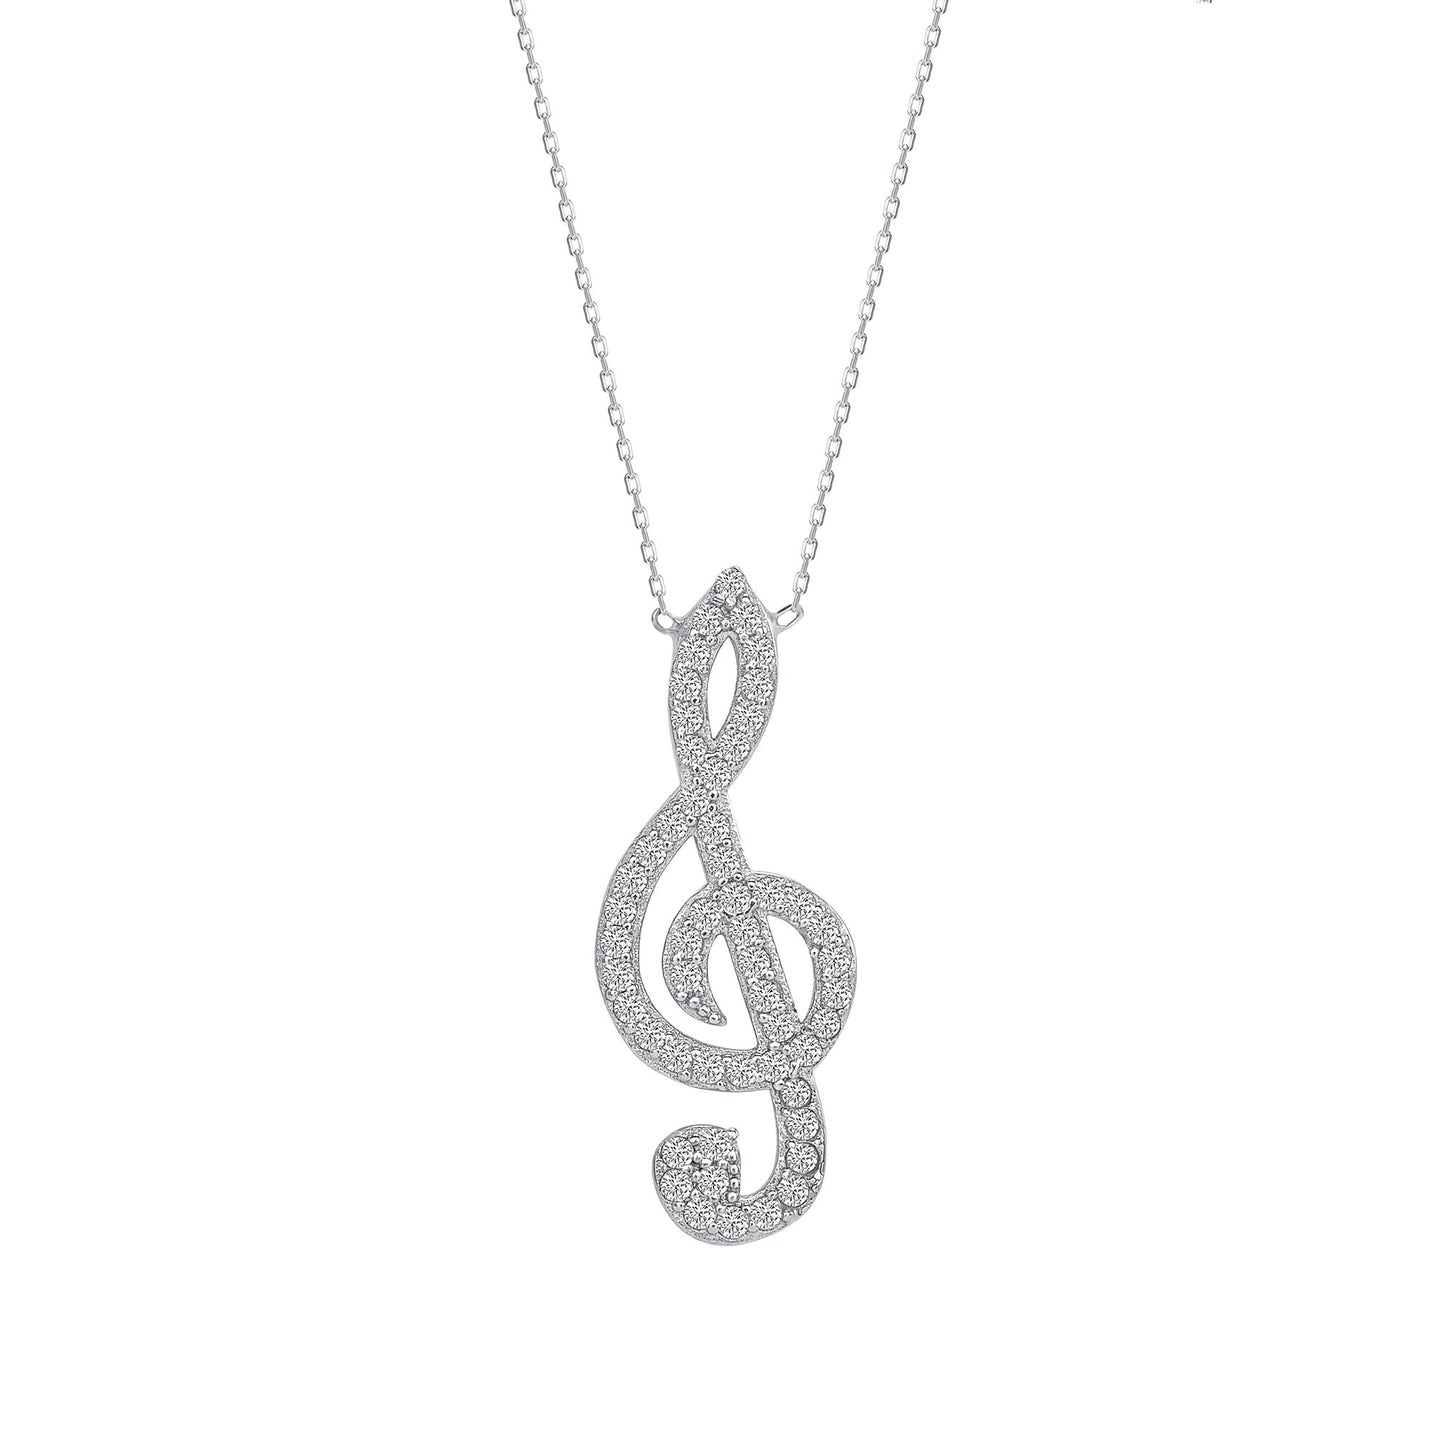 Silver 925 Rhodium Plated Music Note Necklace. HJ286